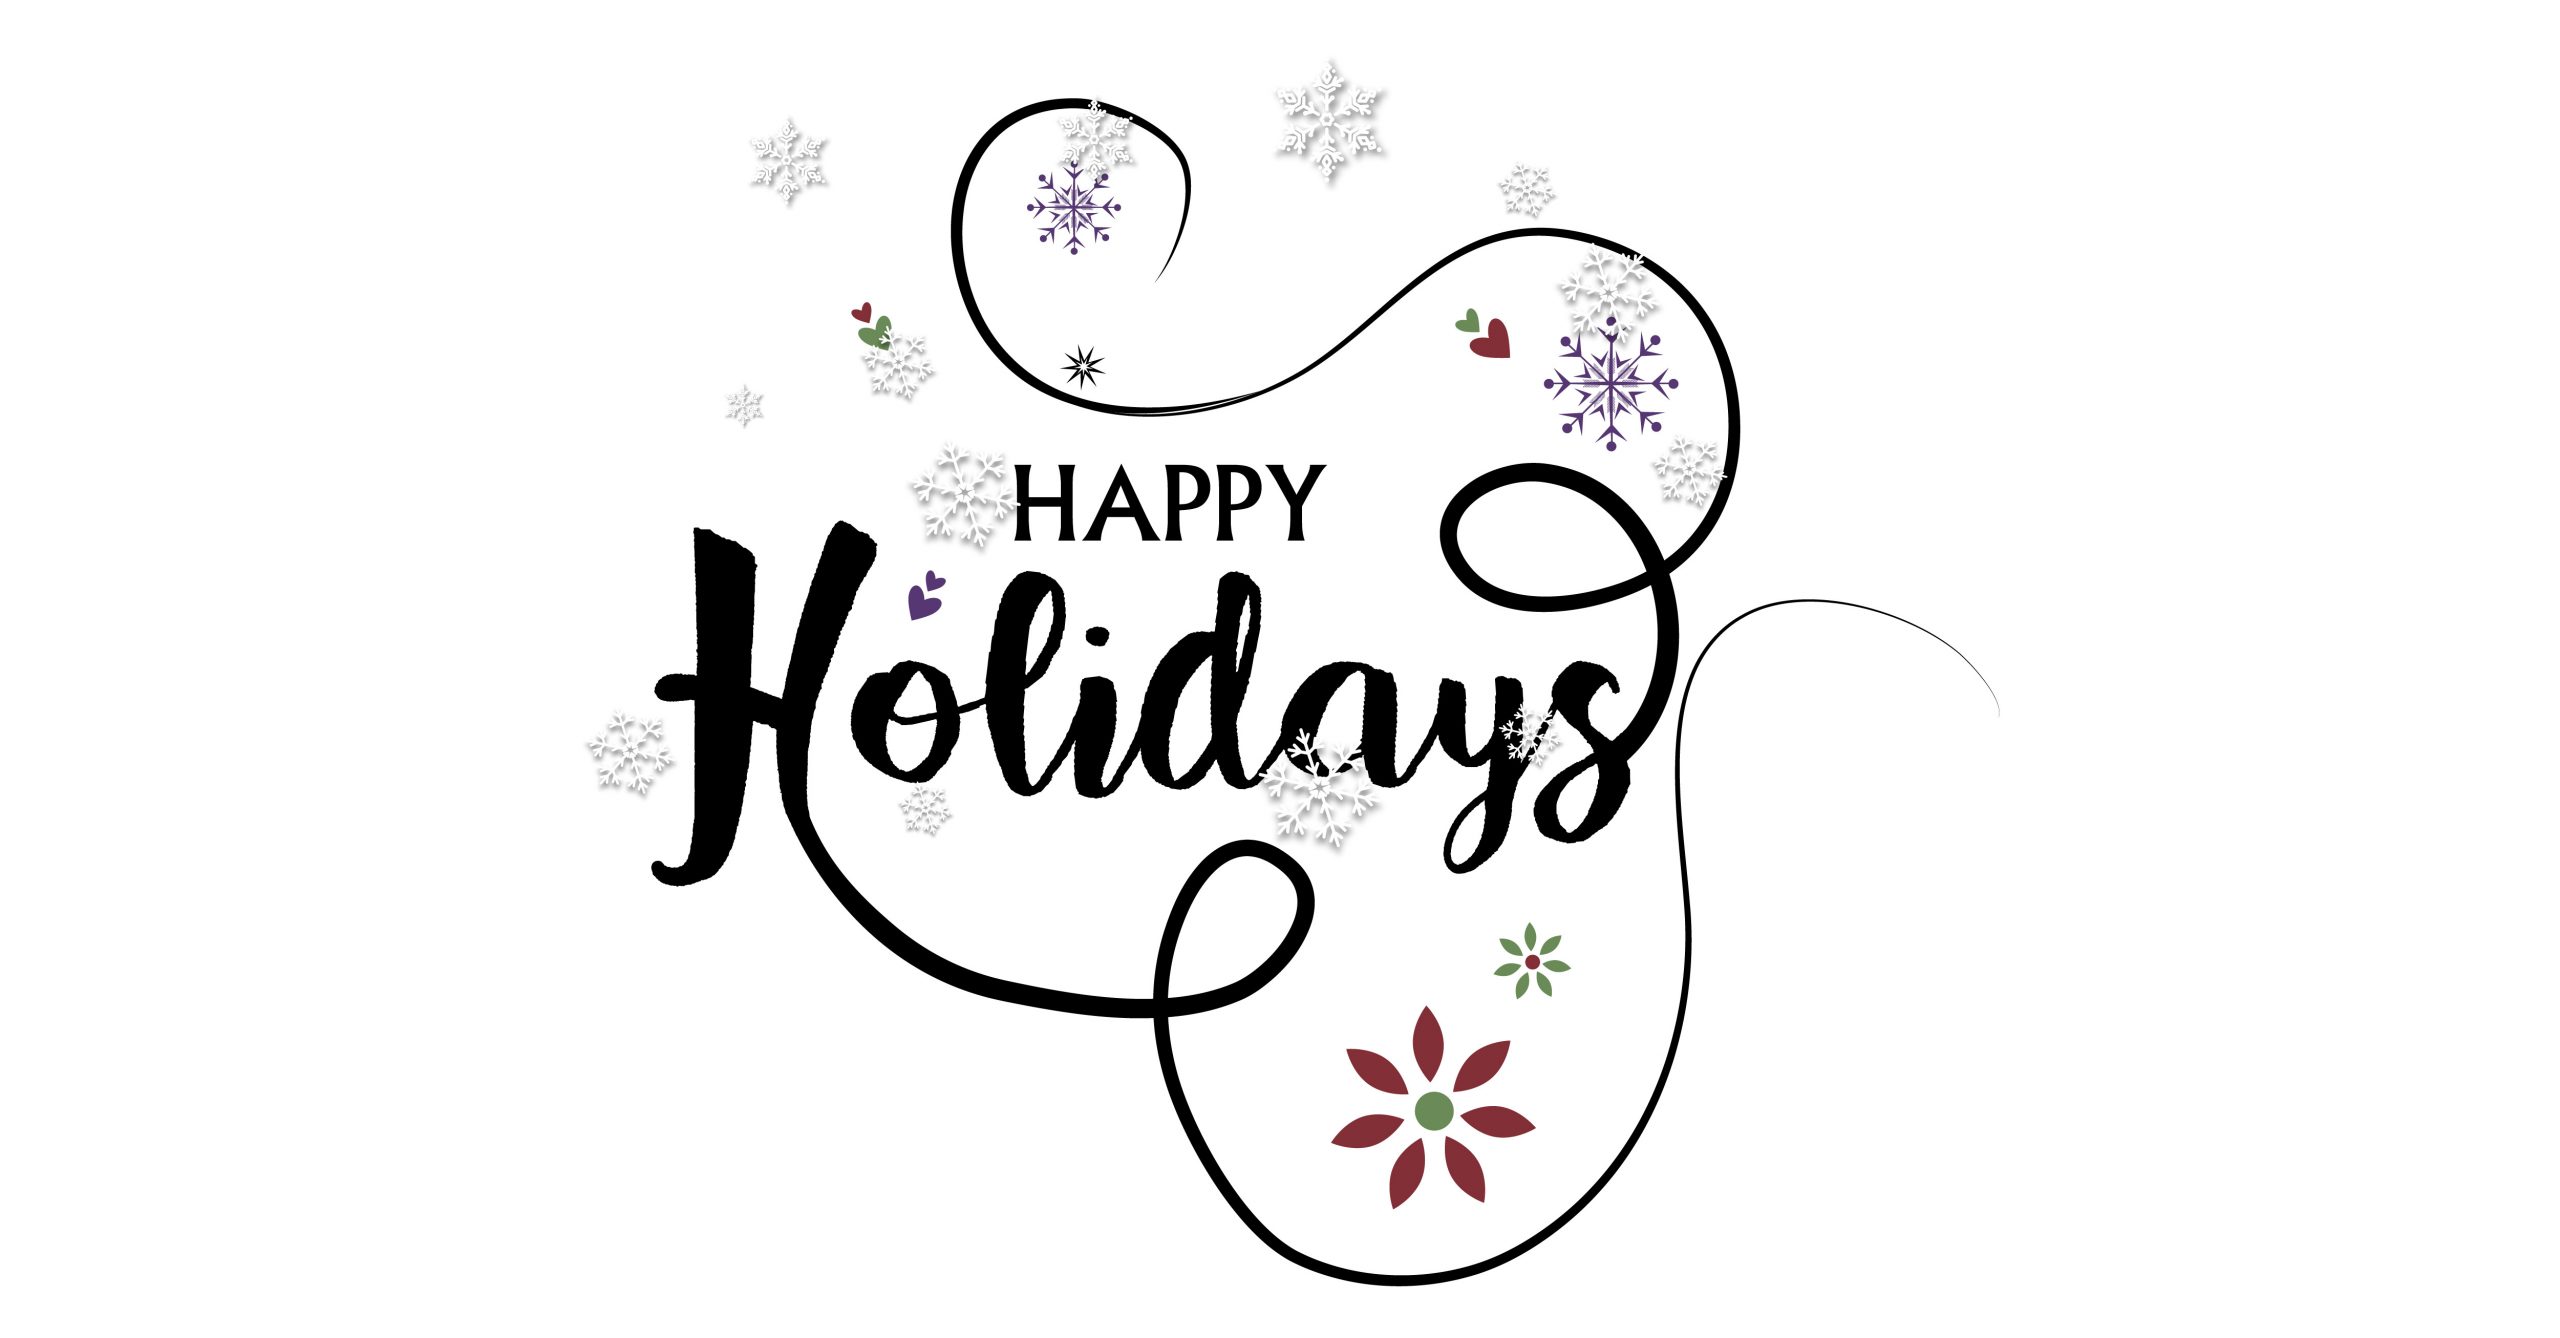 Happy Holidays From Everyone At Synergy Merchants!